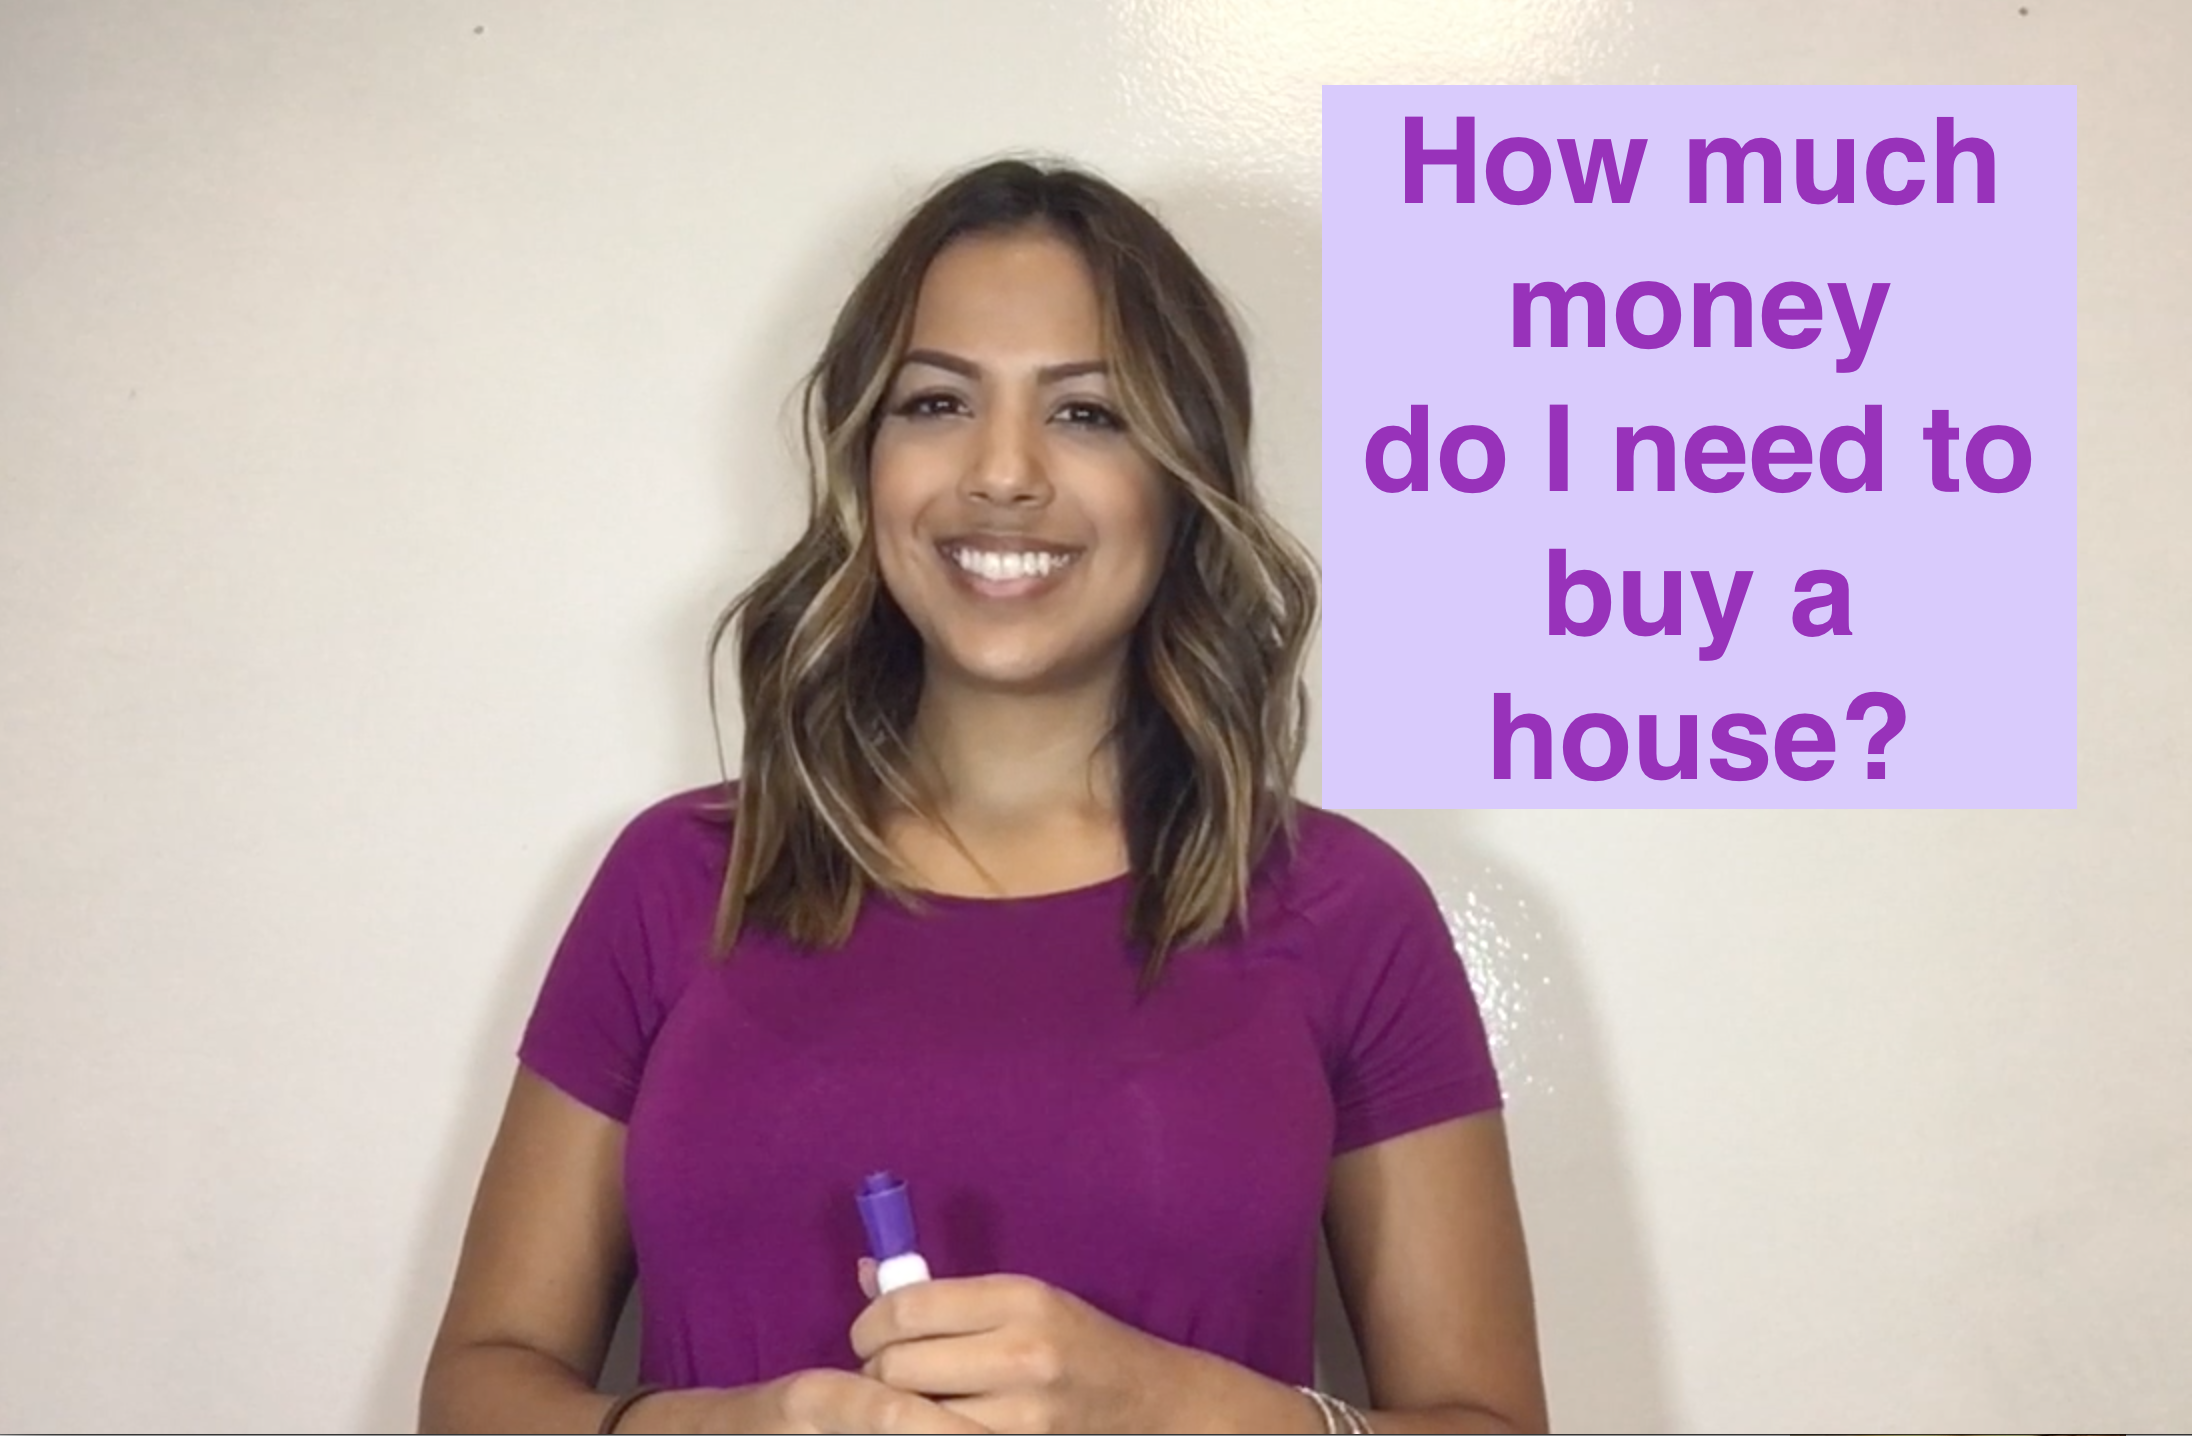 How much money do I need to buy a house?